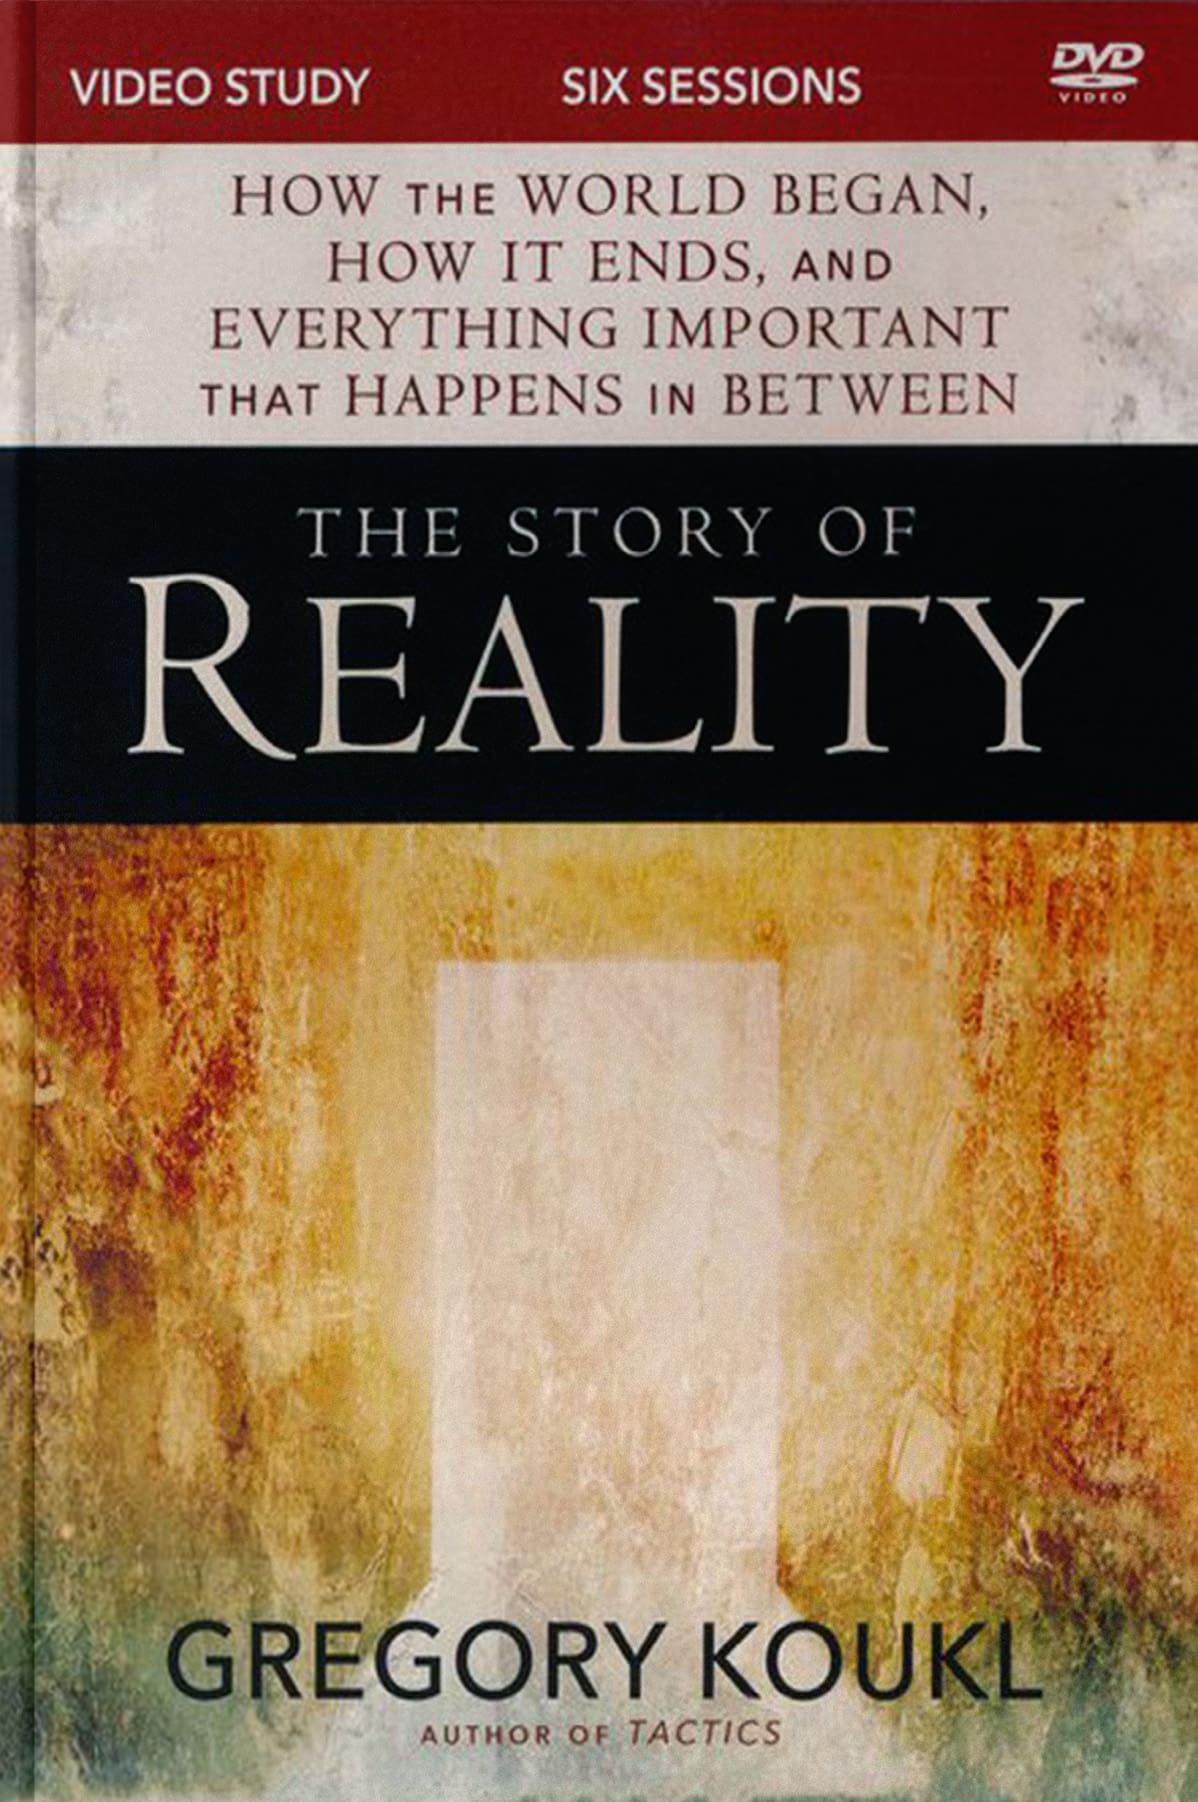 story-of-reality-video